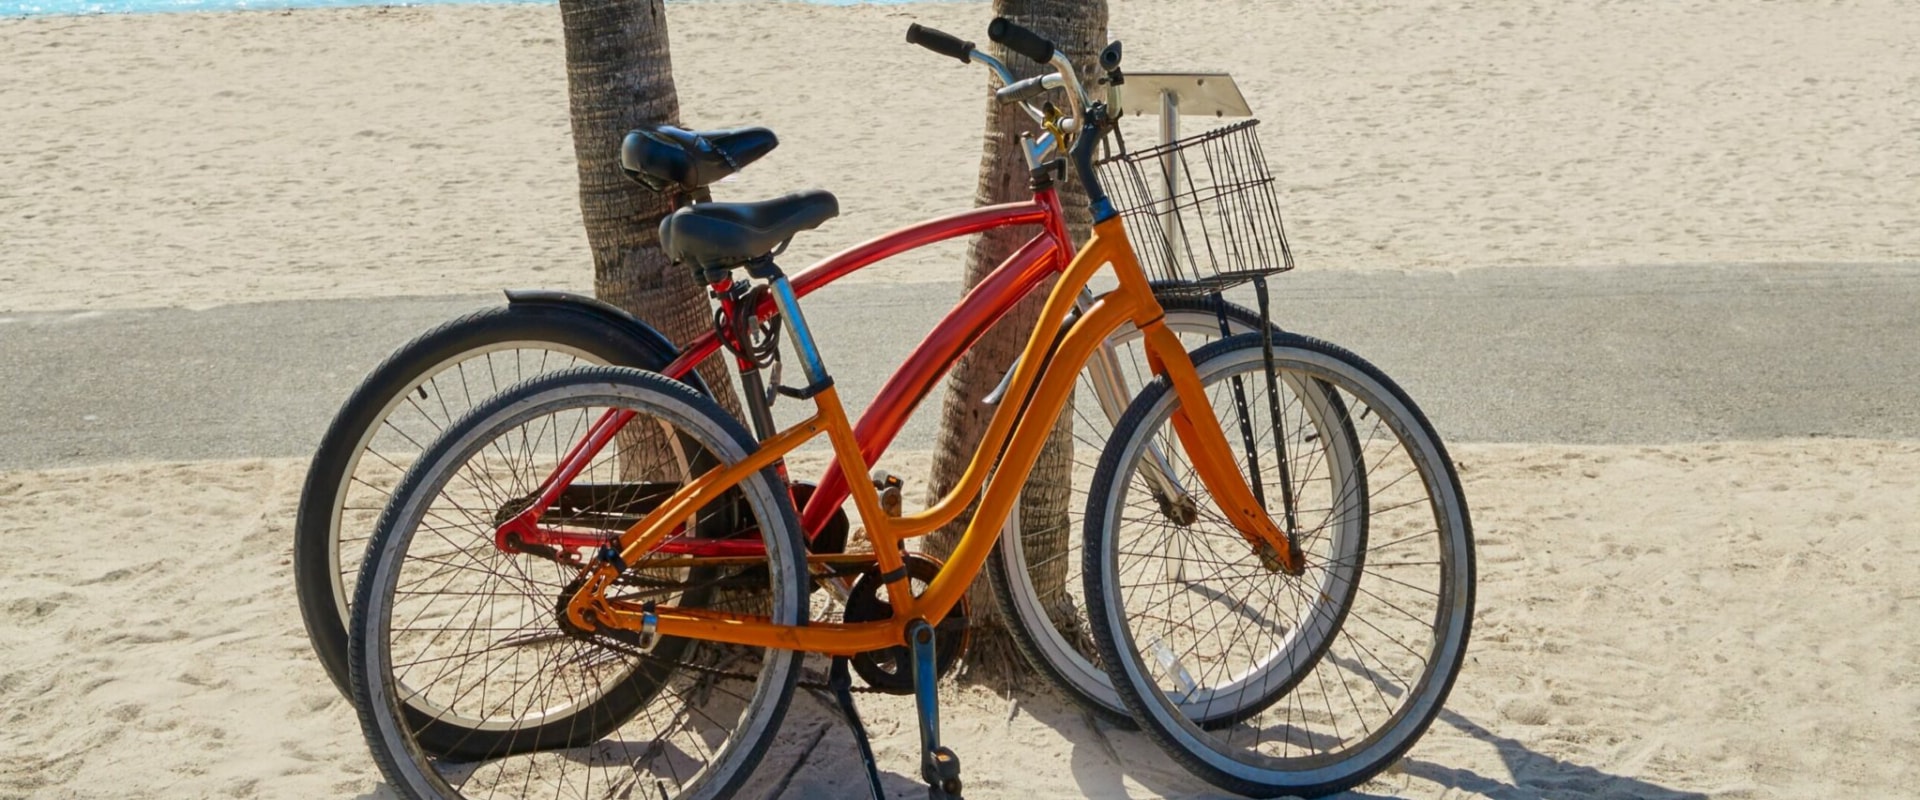 Essential Tips for Packing for a Bicycle Ride in Palm Beach County, Florida